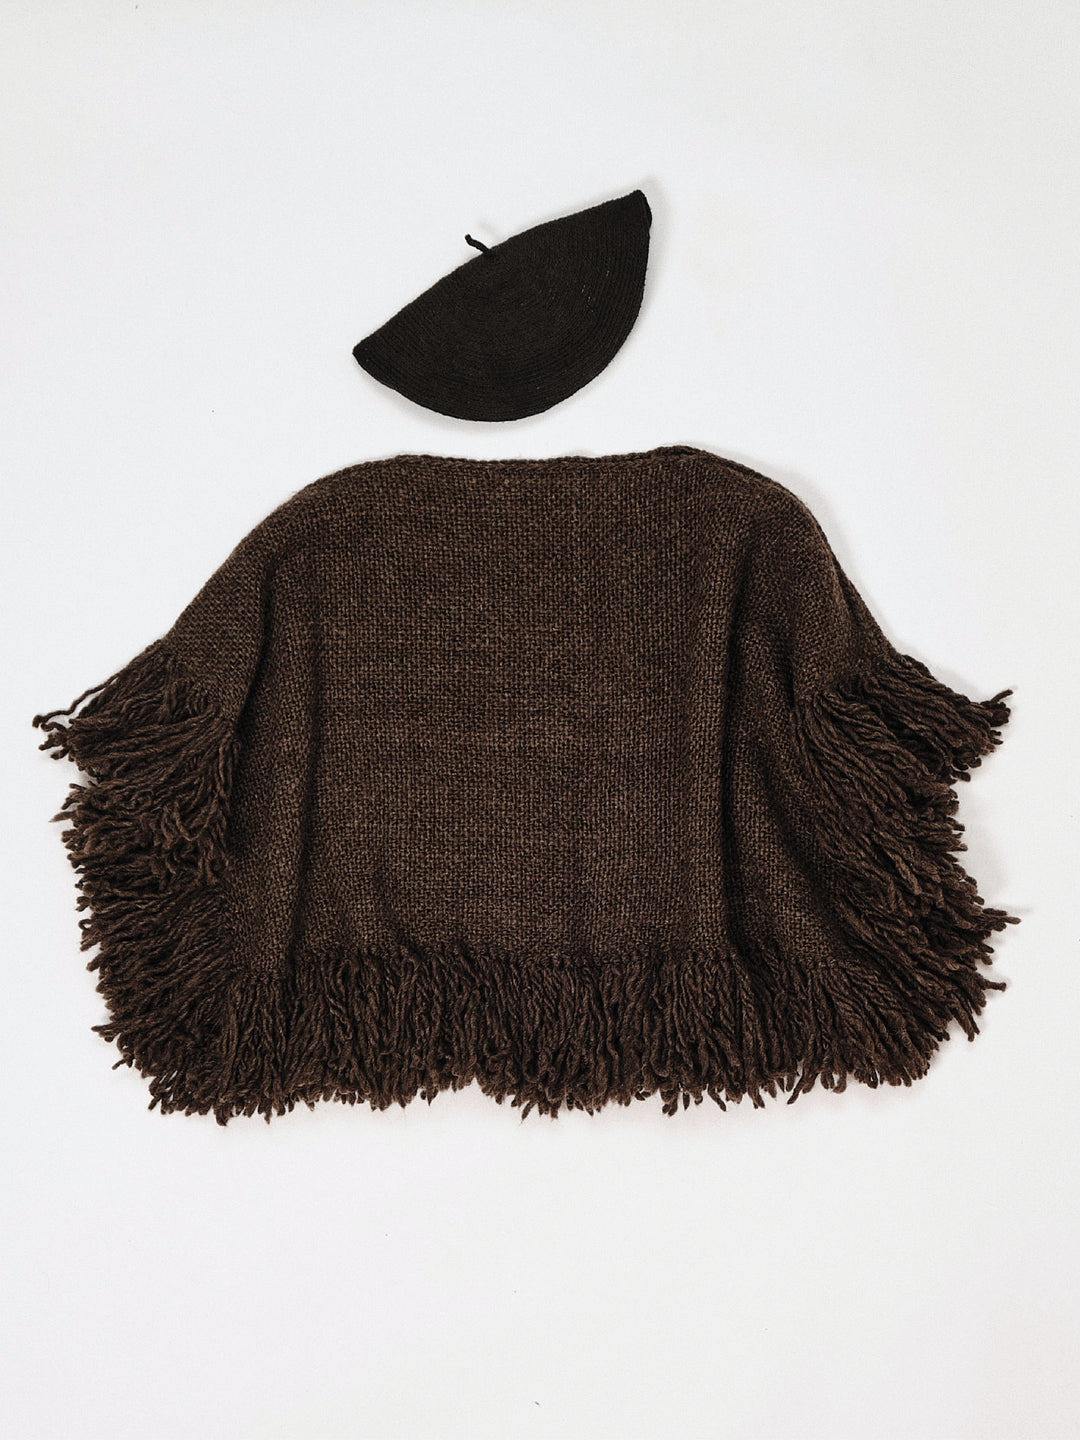 Chacani Ponchito in Brown Wool